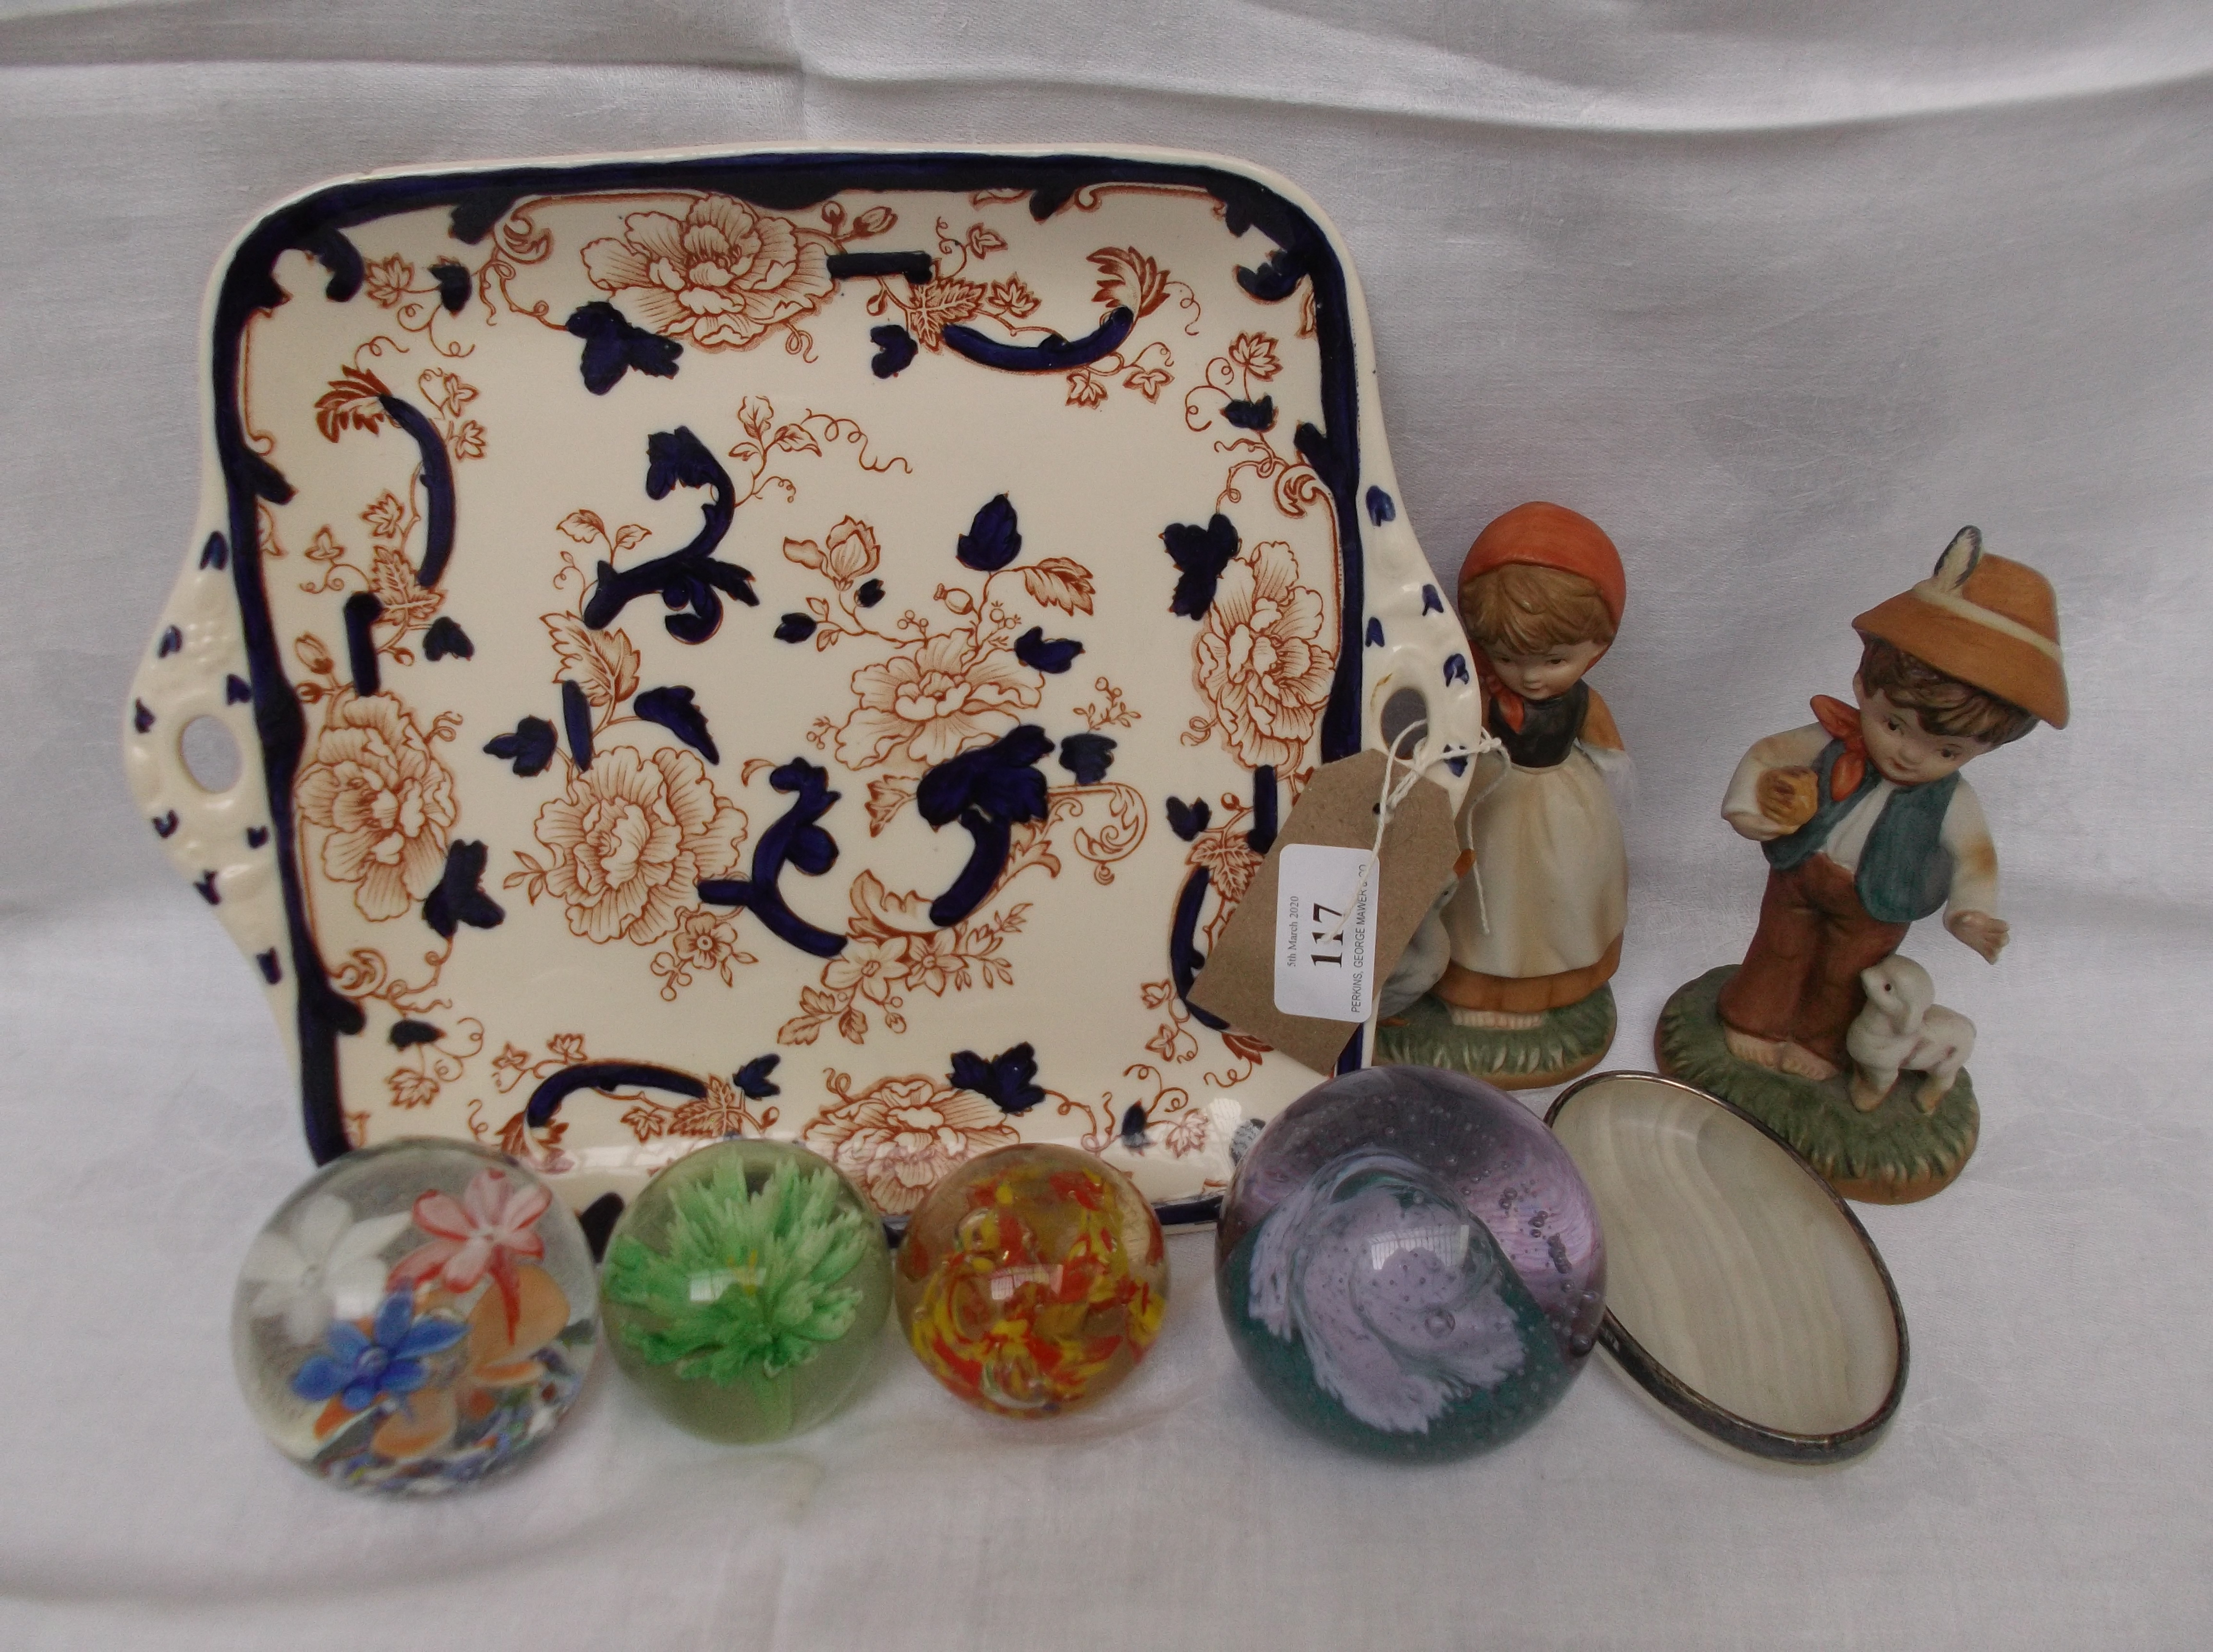 Masons sandwich plate with 4 decorative paper weights,